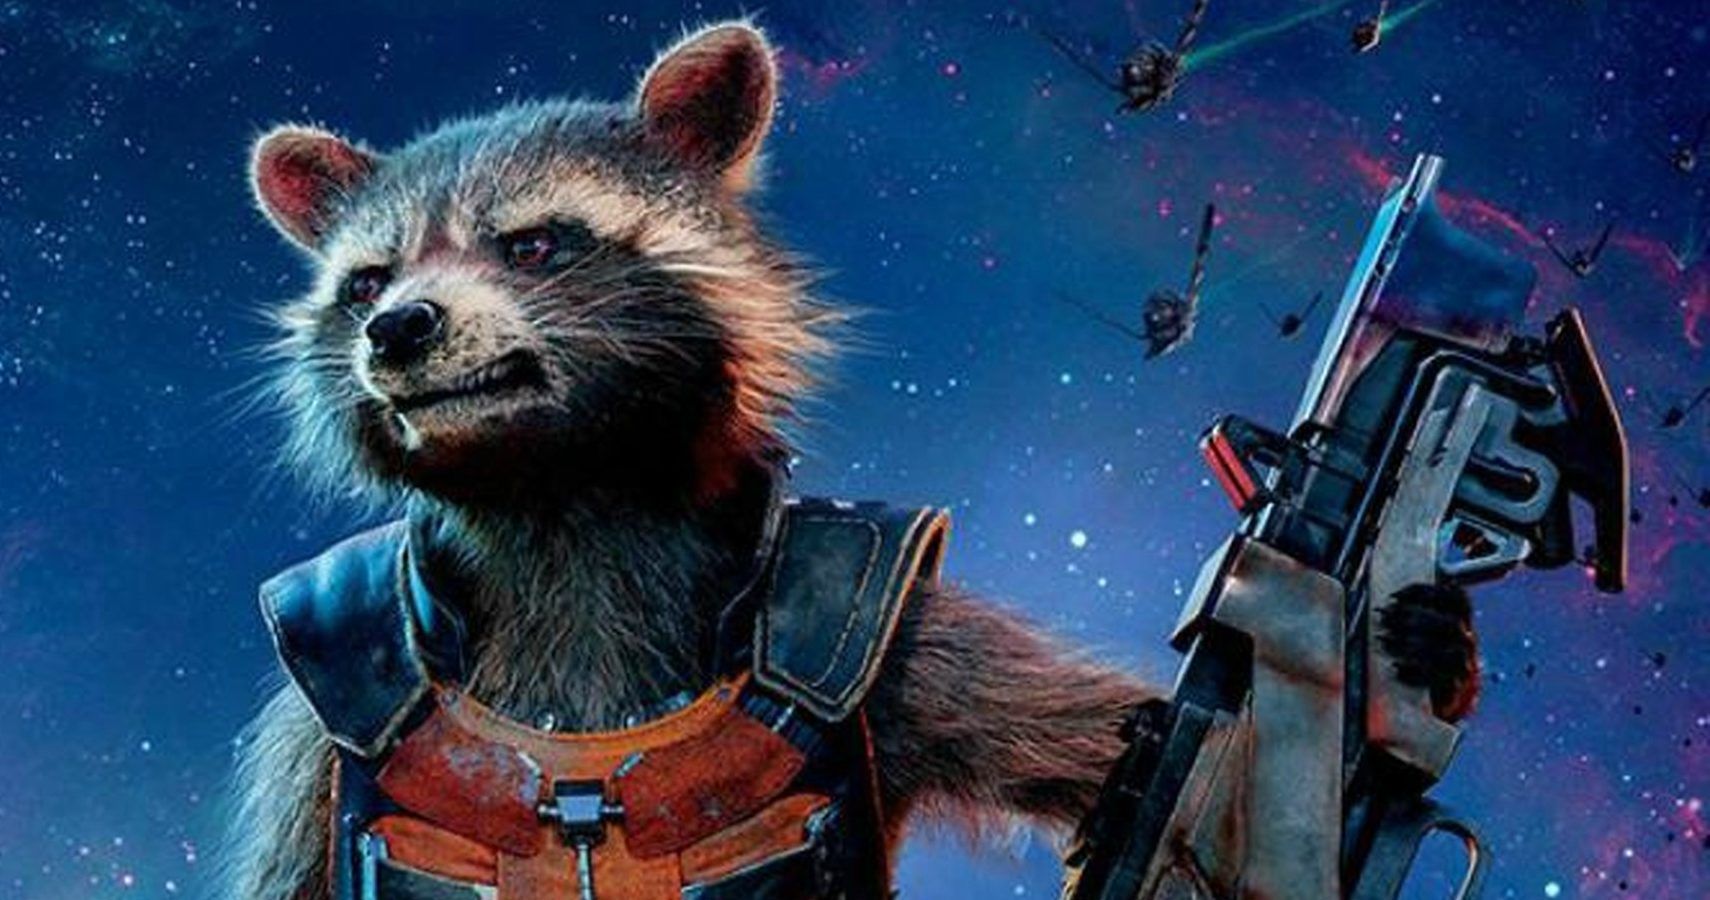 10 Rocket Racoon Quotes From The Mcu That We Will Always Remember